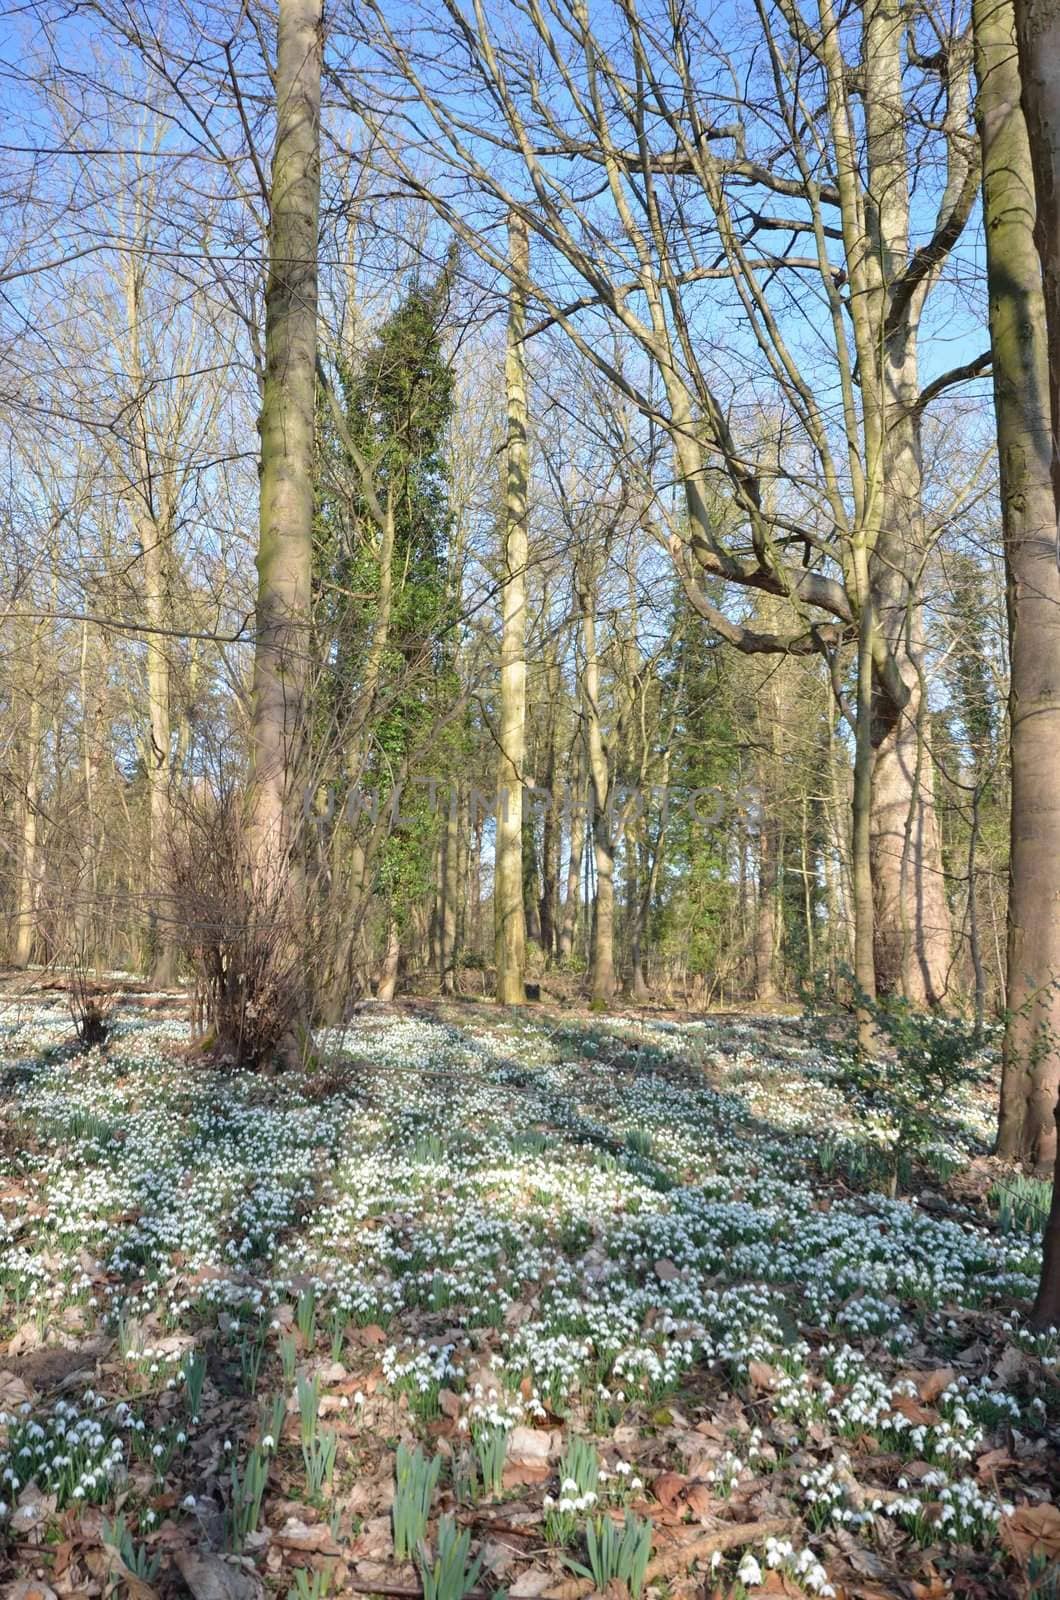 snow drops with trees by pauws99